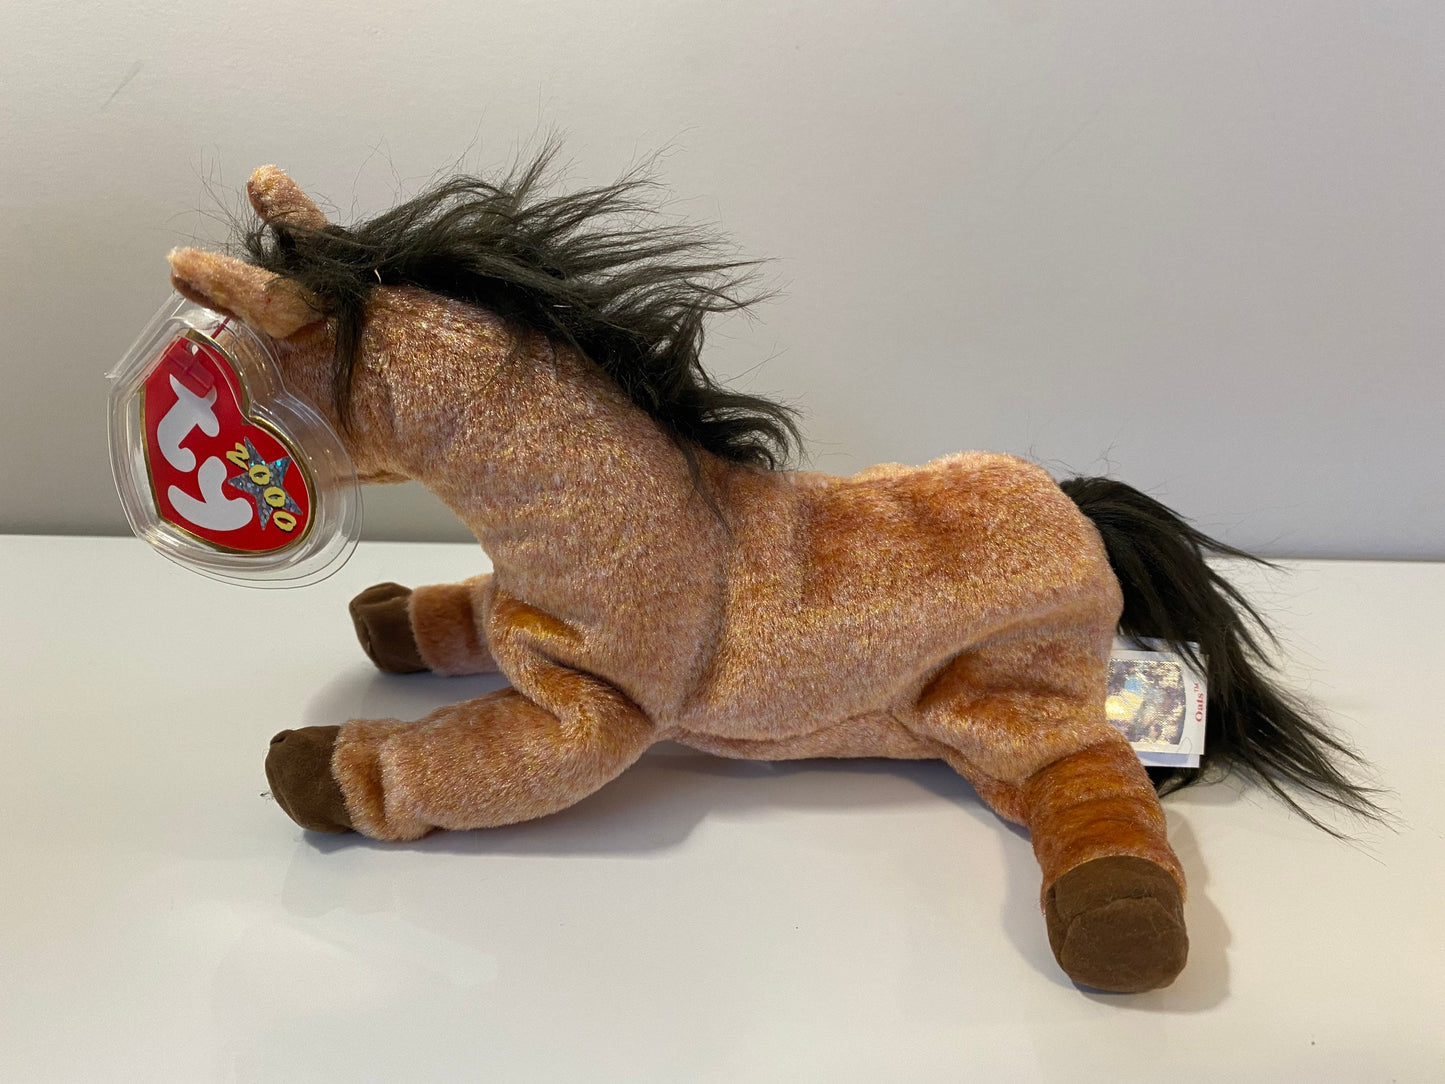 Ty Beanie Baby “Oats” the Horse! (7 inch)